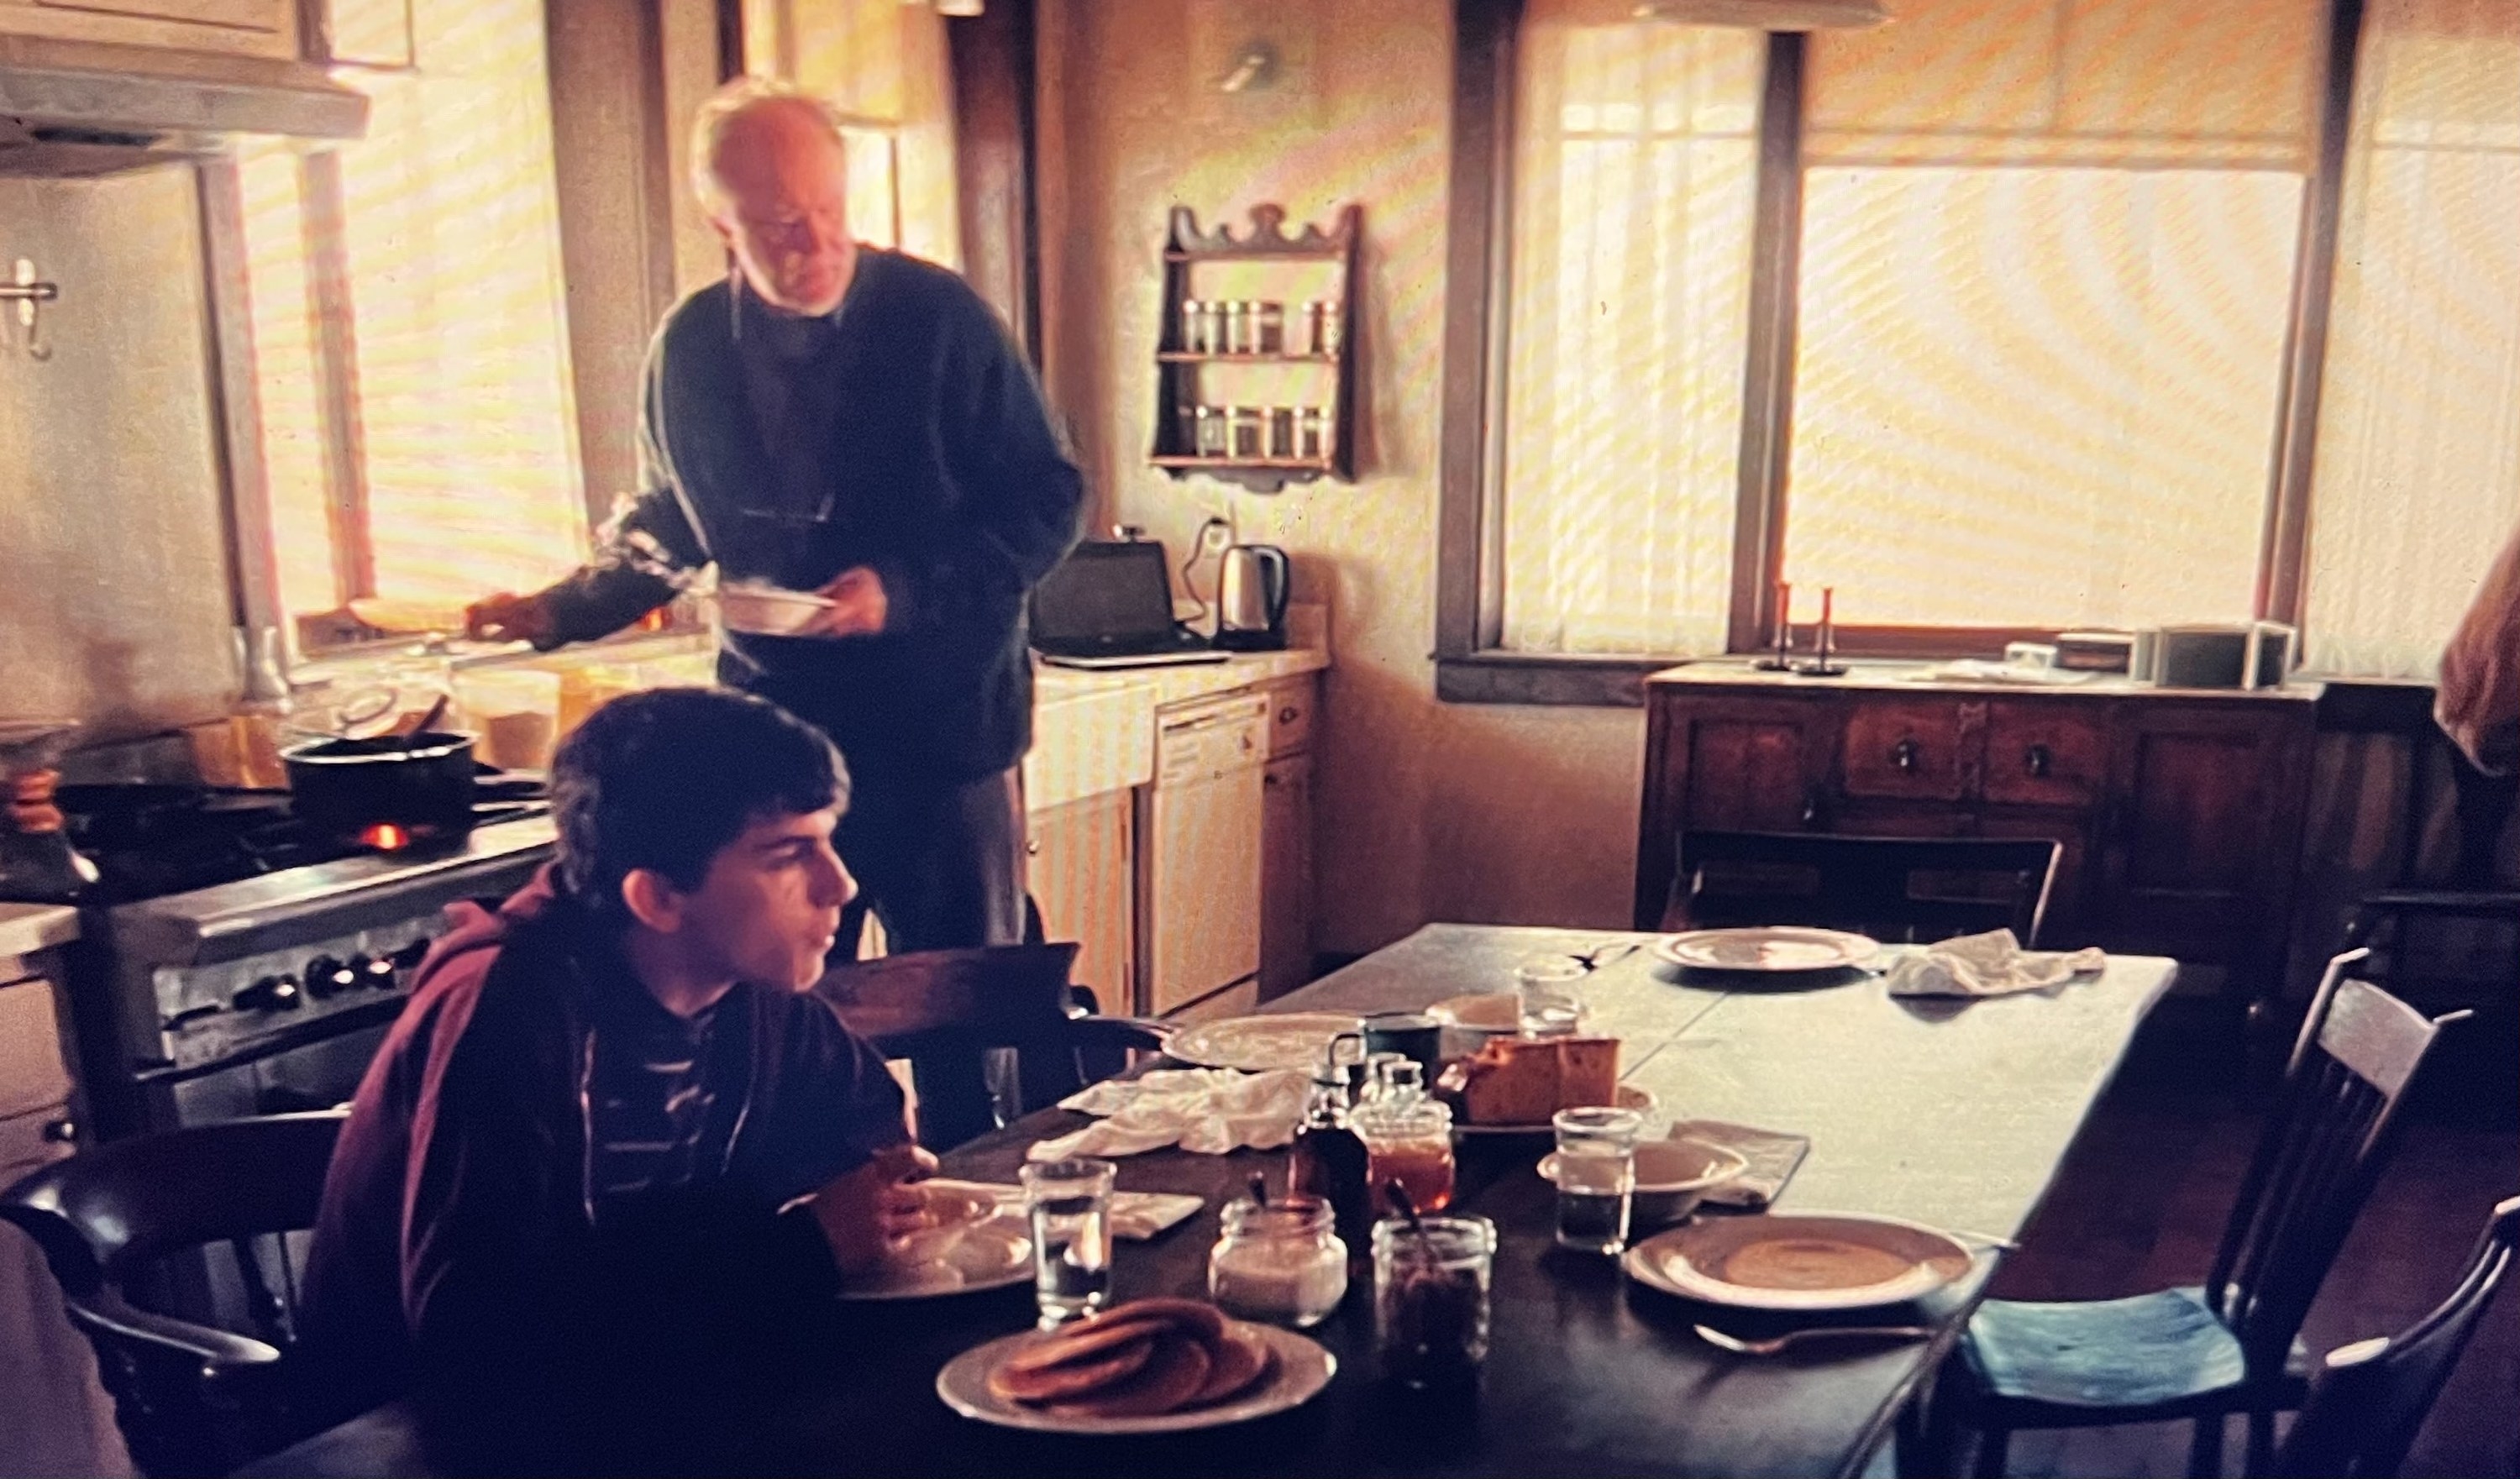 Donald and Tom sit at the kitchen table in Interstellar, breakfast food laid out